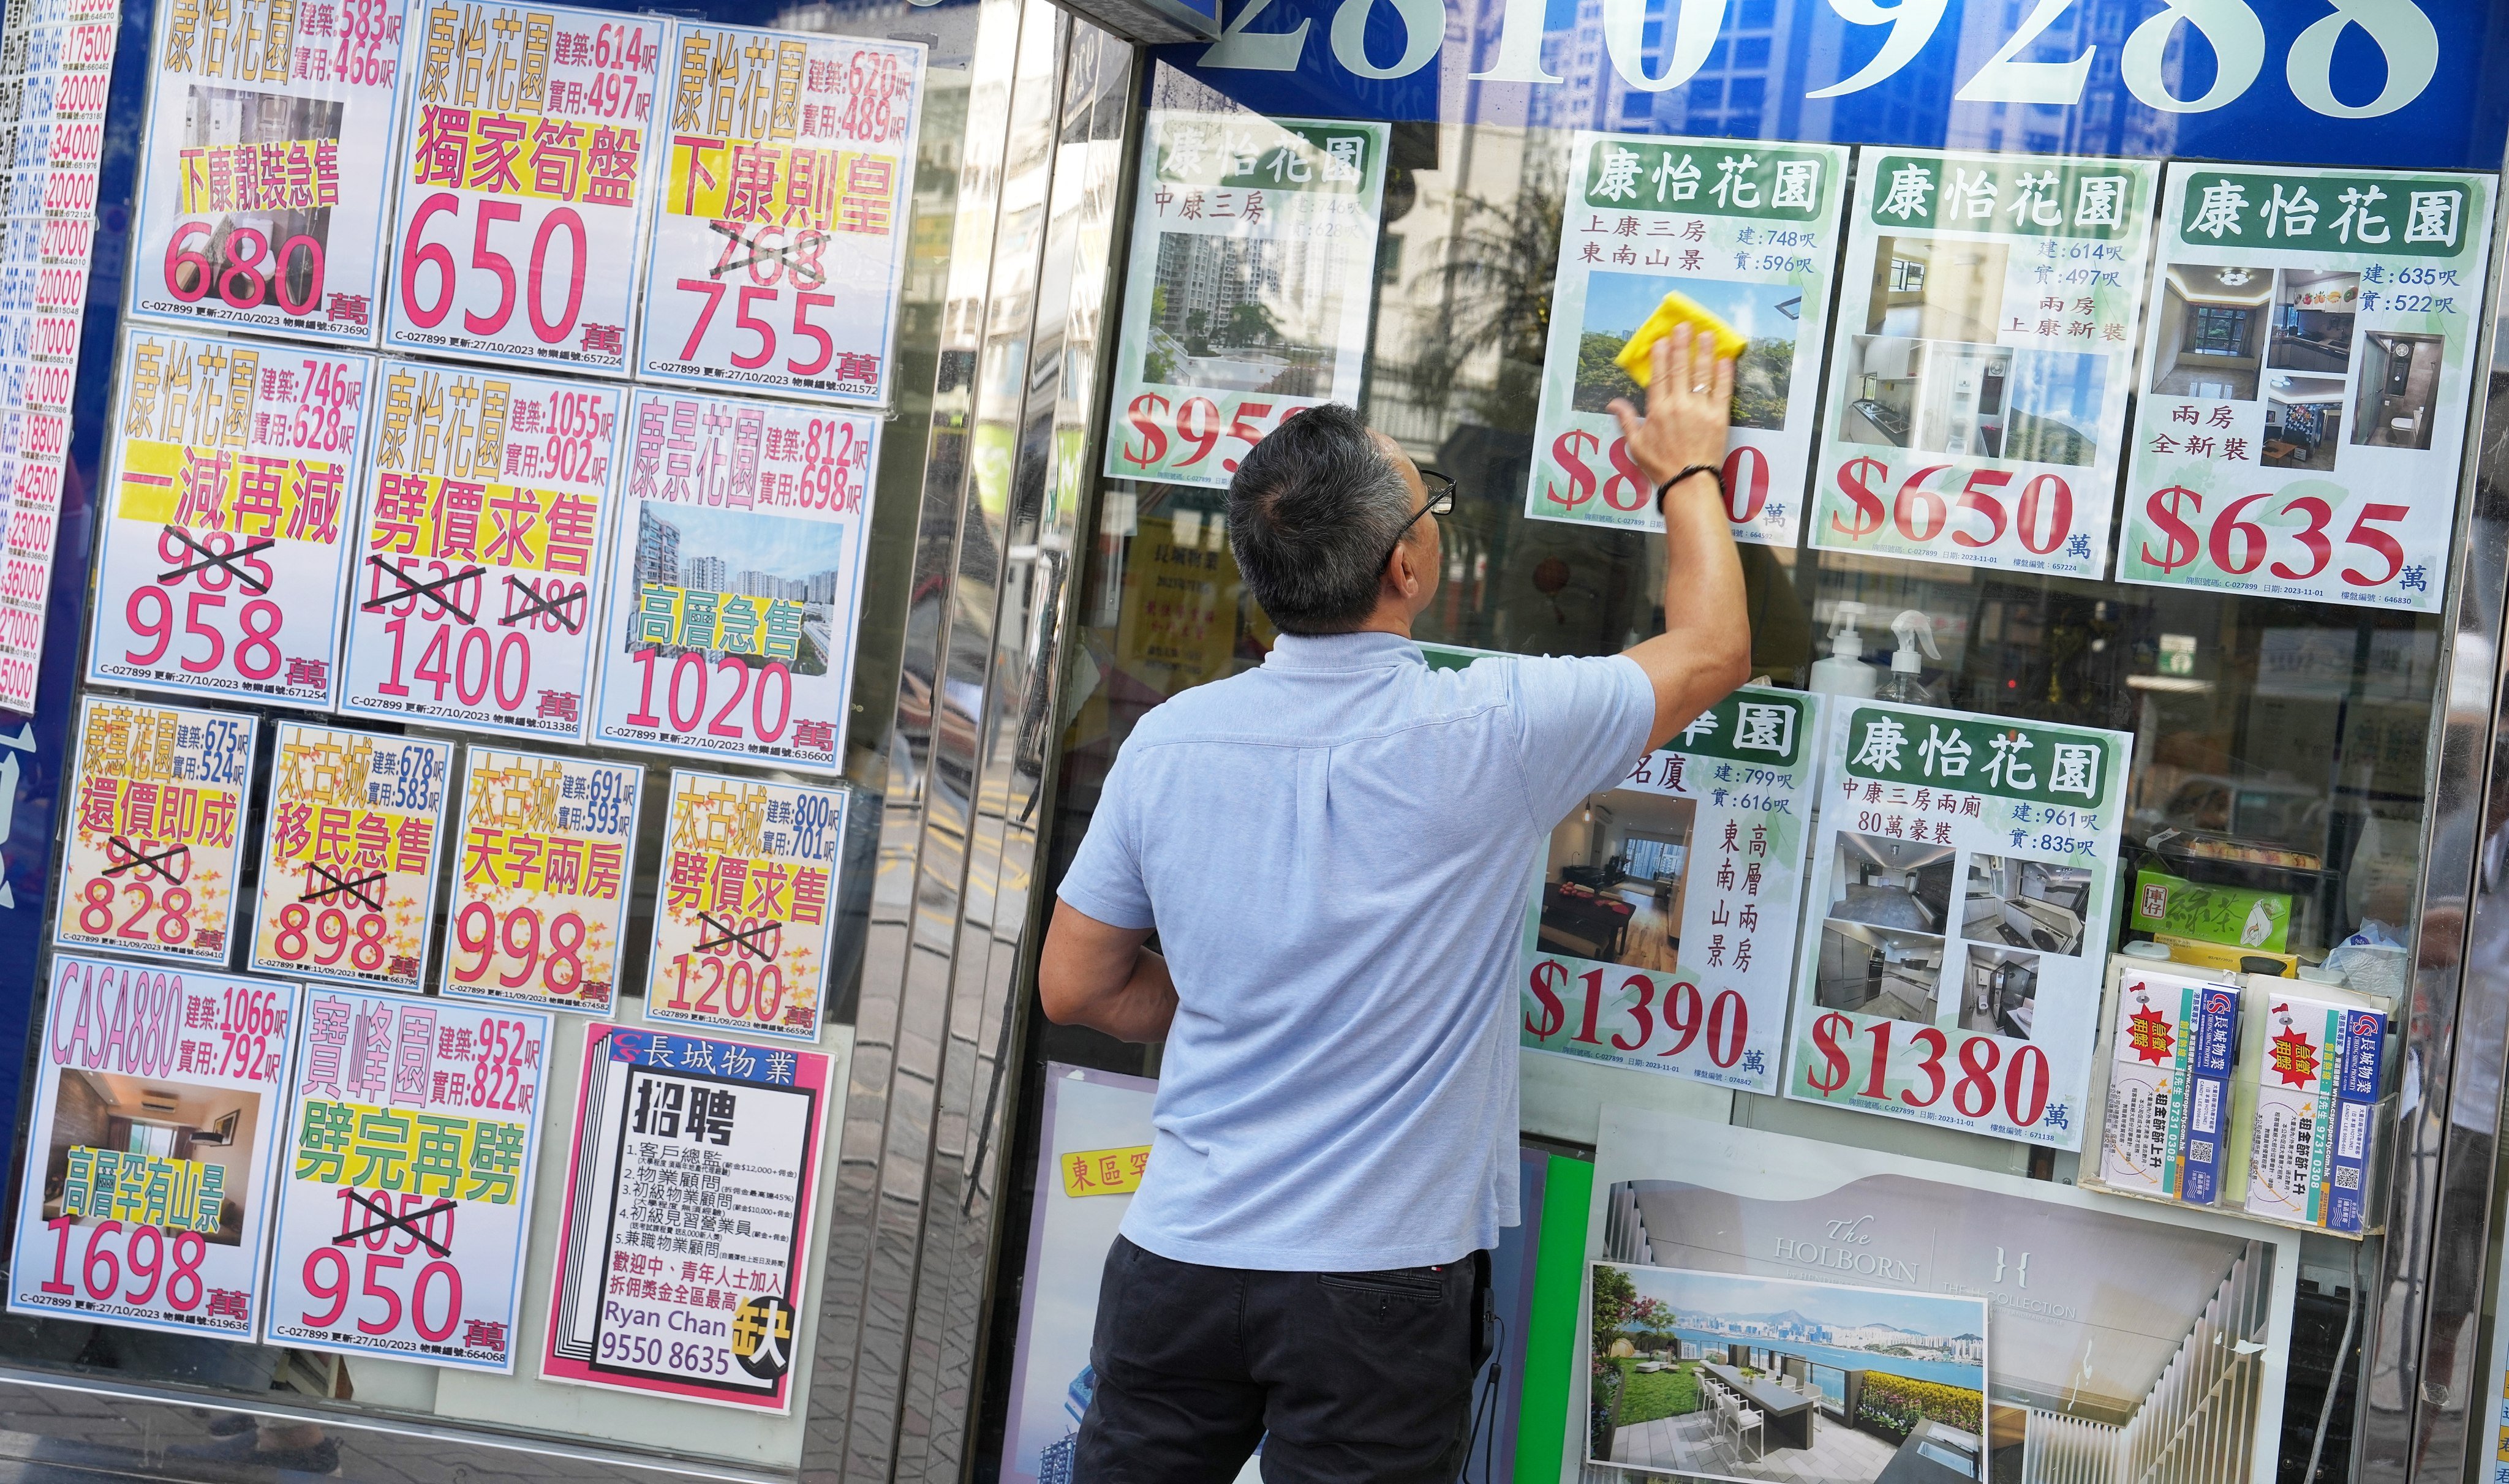 Agencies advertising lower property prices are seen in Quarry Bay, Hong Kong, on November 2. Photo: Elson LI